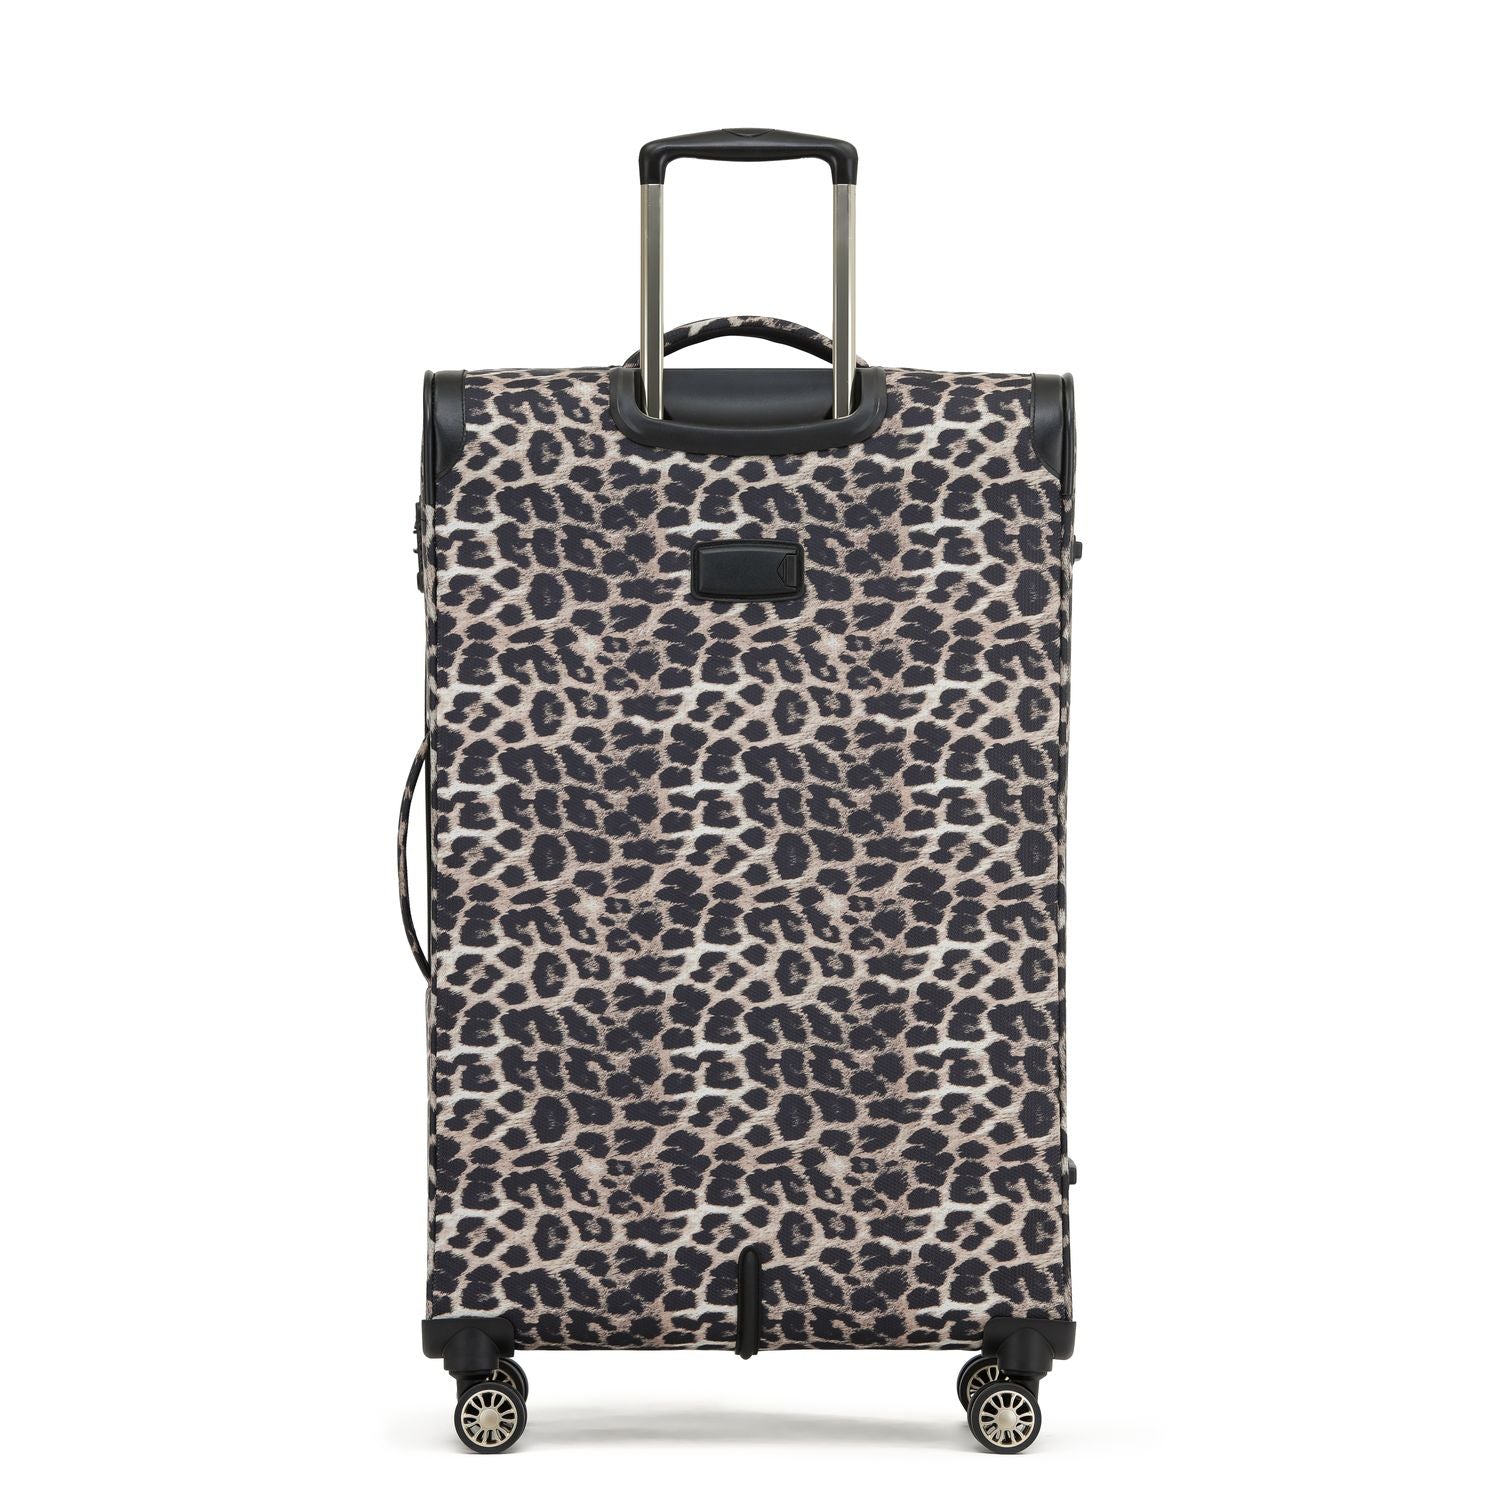 Tosca - So Lite 3.0 29in Large 4 Wheel Soft Suitcase - Leopard-3